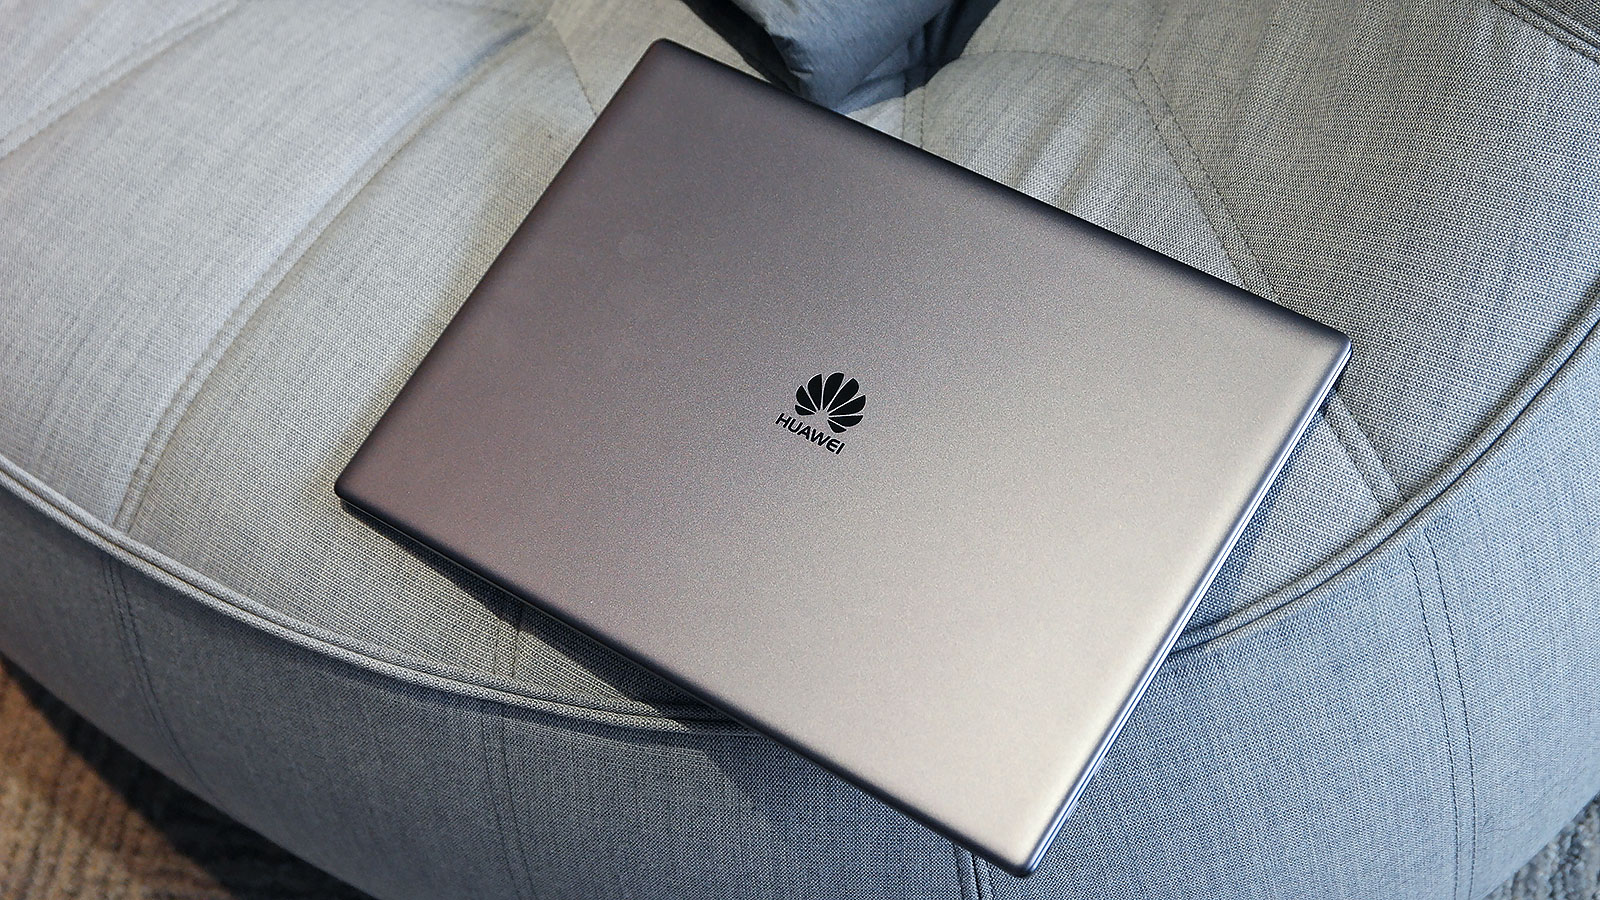 Huawei’s Matebook X Pro Is The MacBook Rival People Have Been Asking For